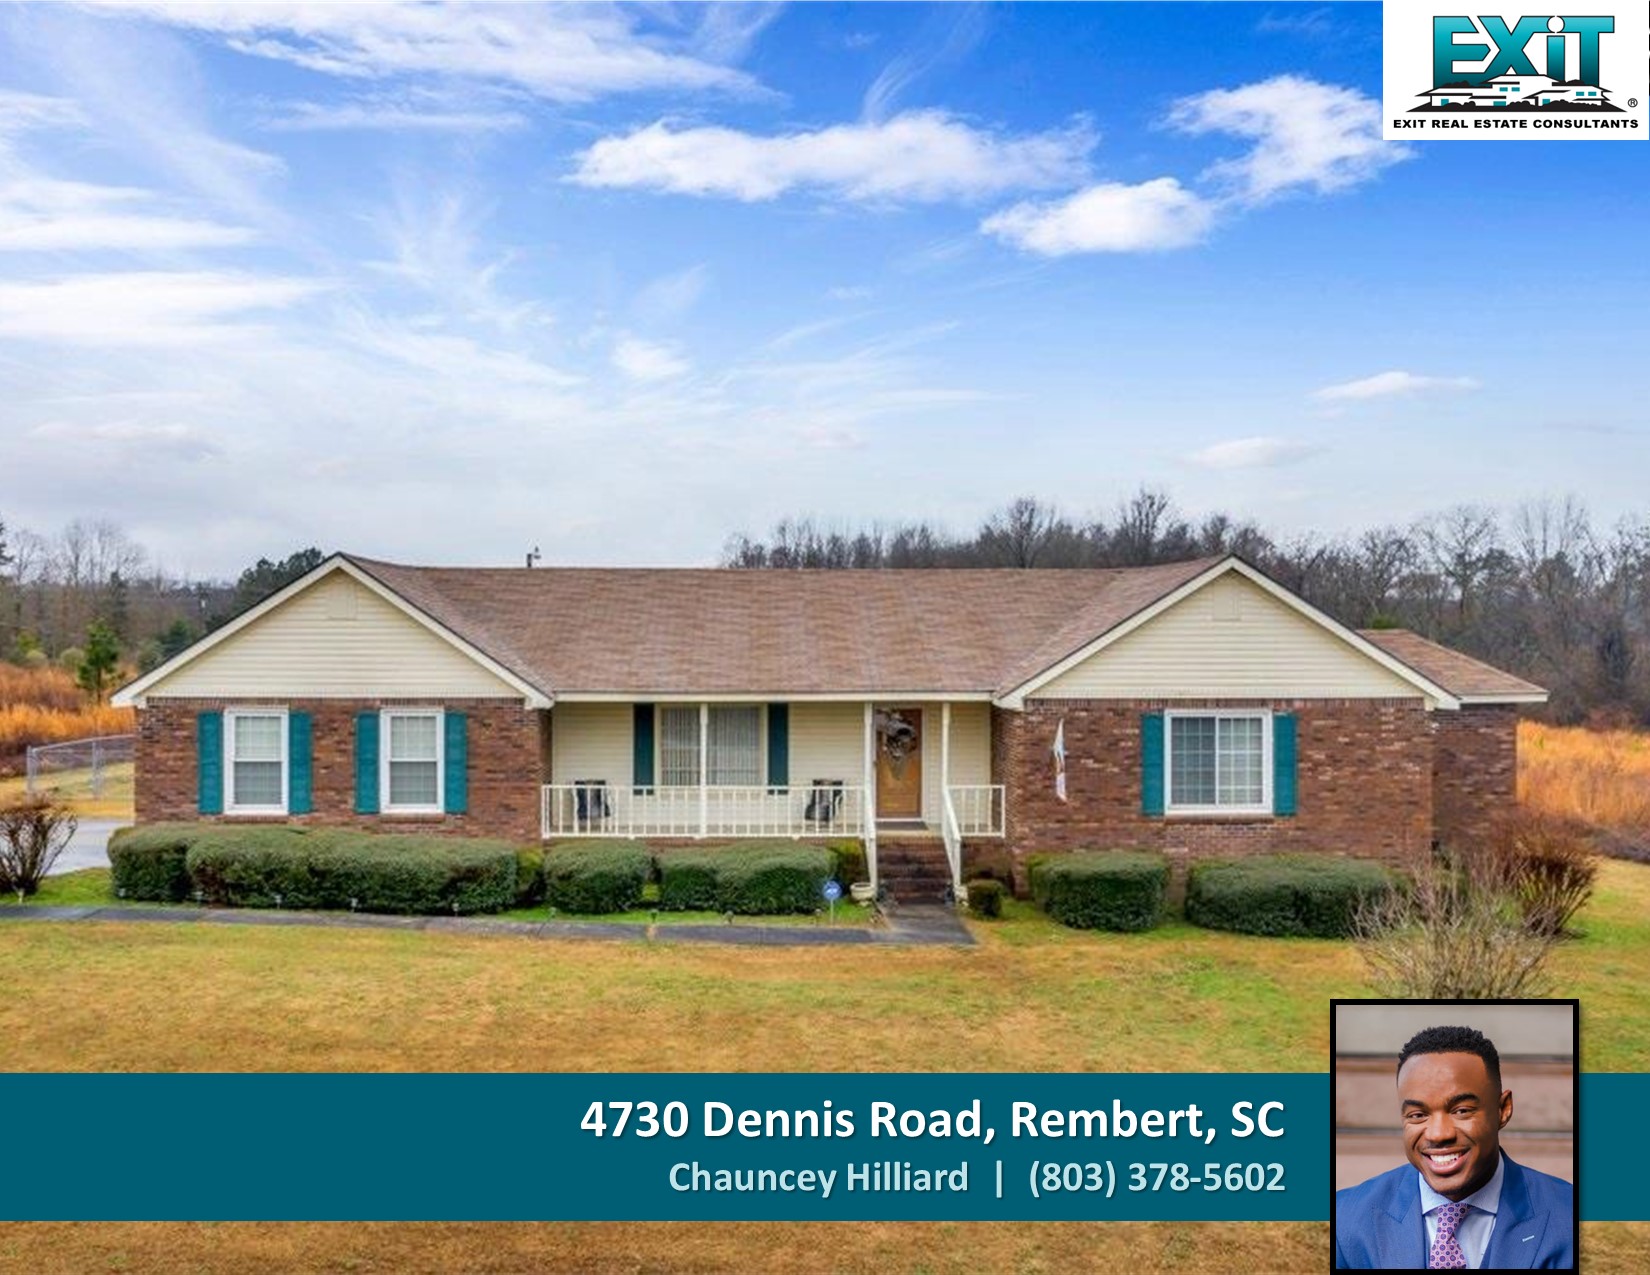 Just listed in Rembert